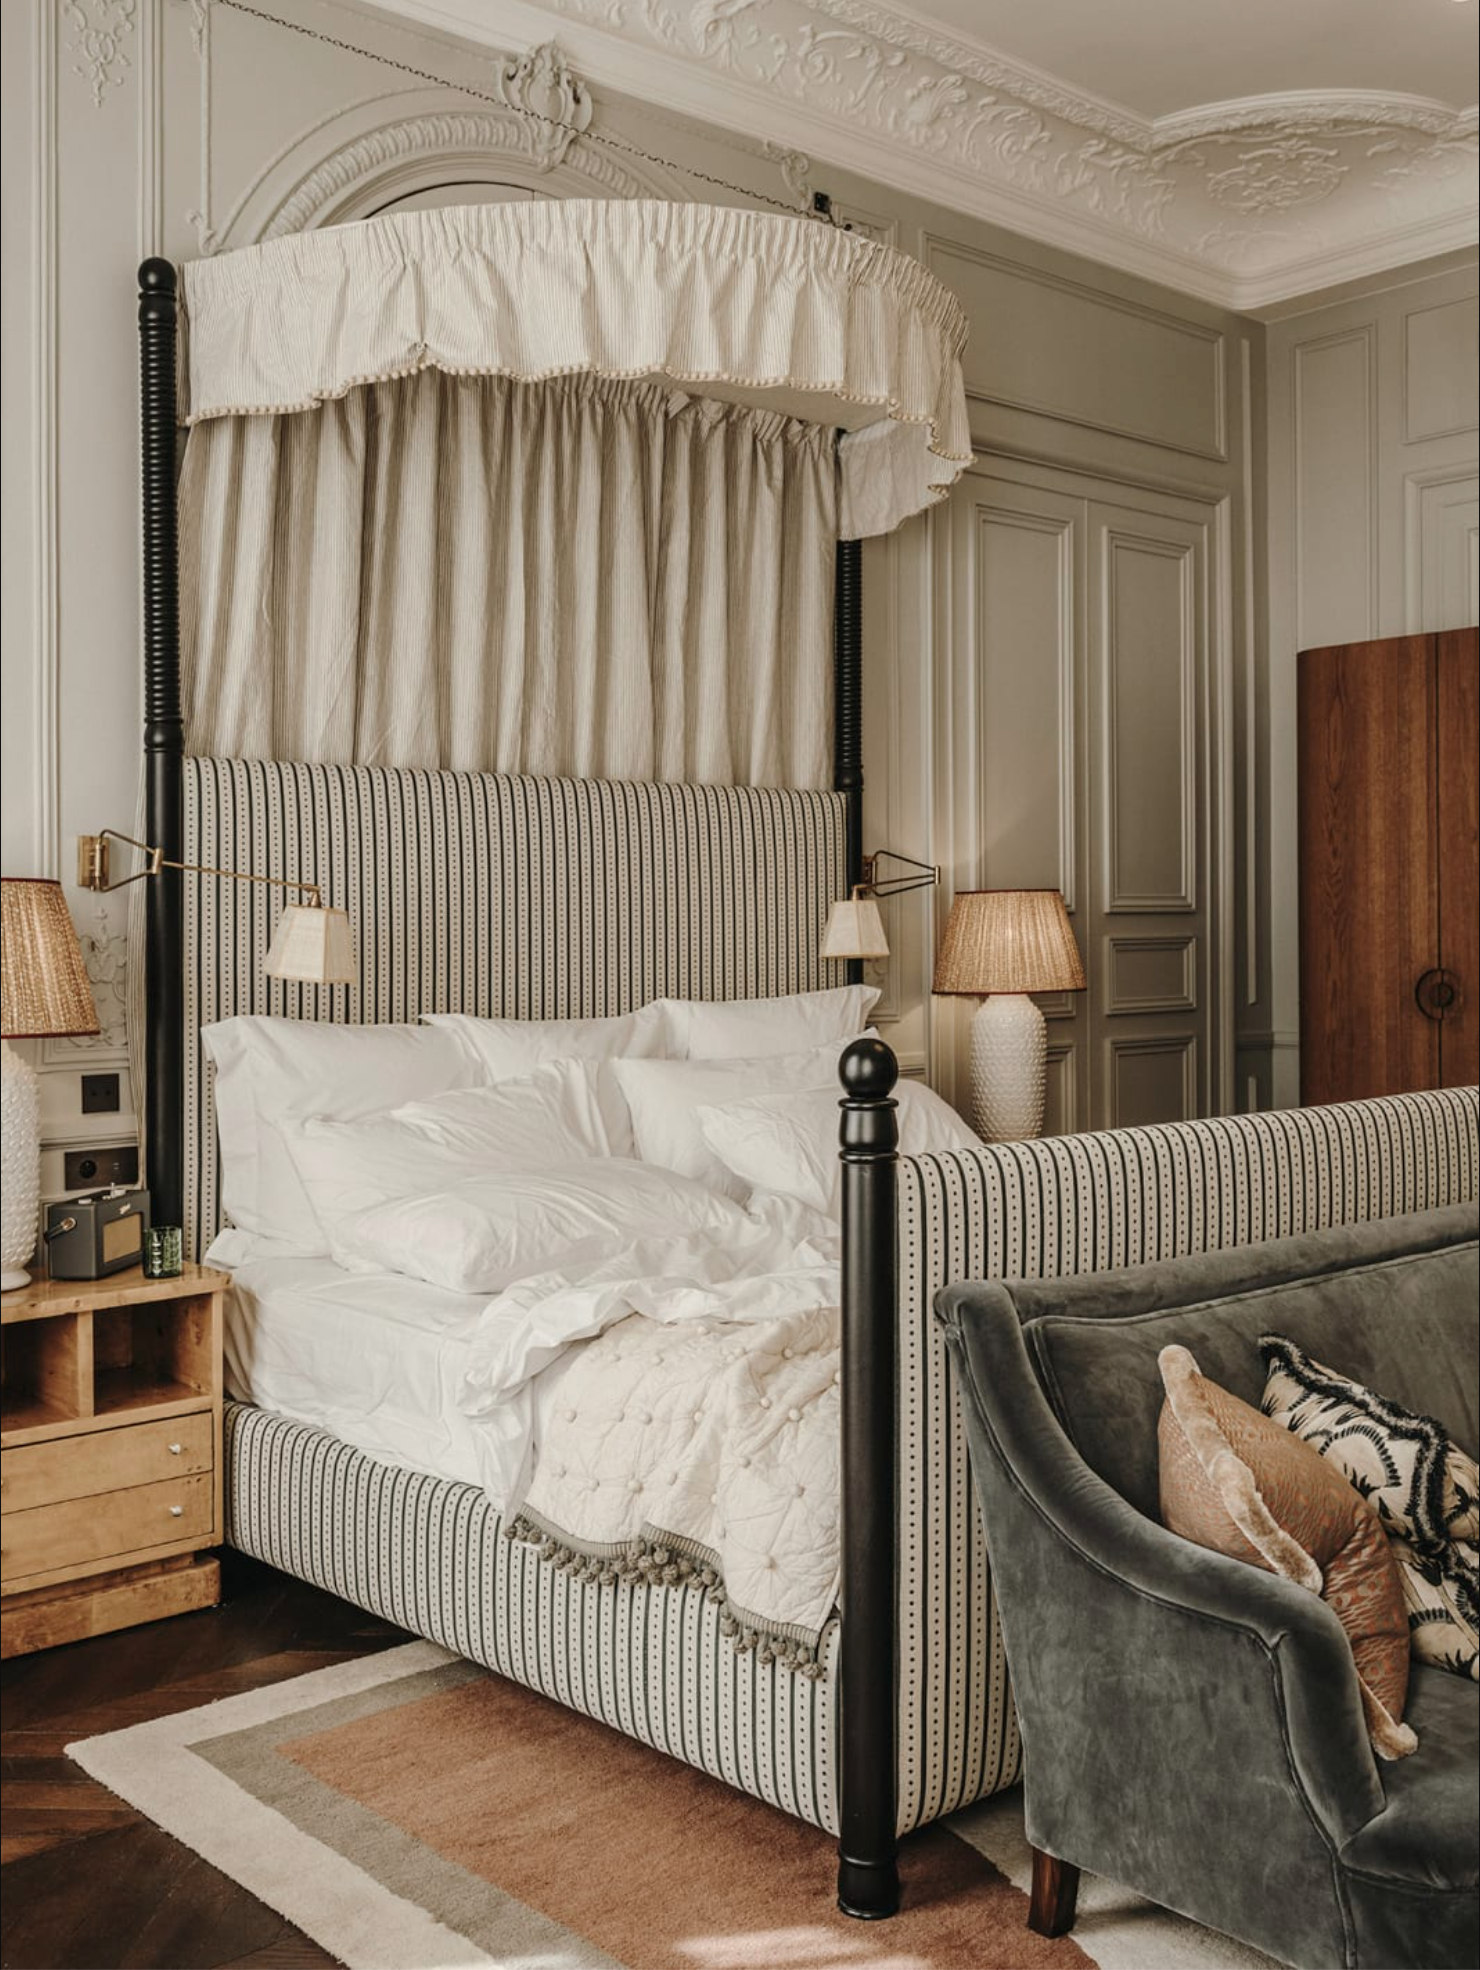 A ticking strip canopy bed at Soho House Paris